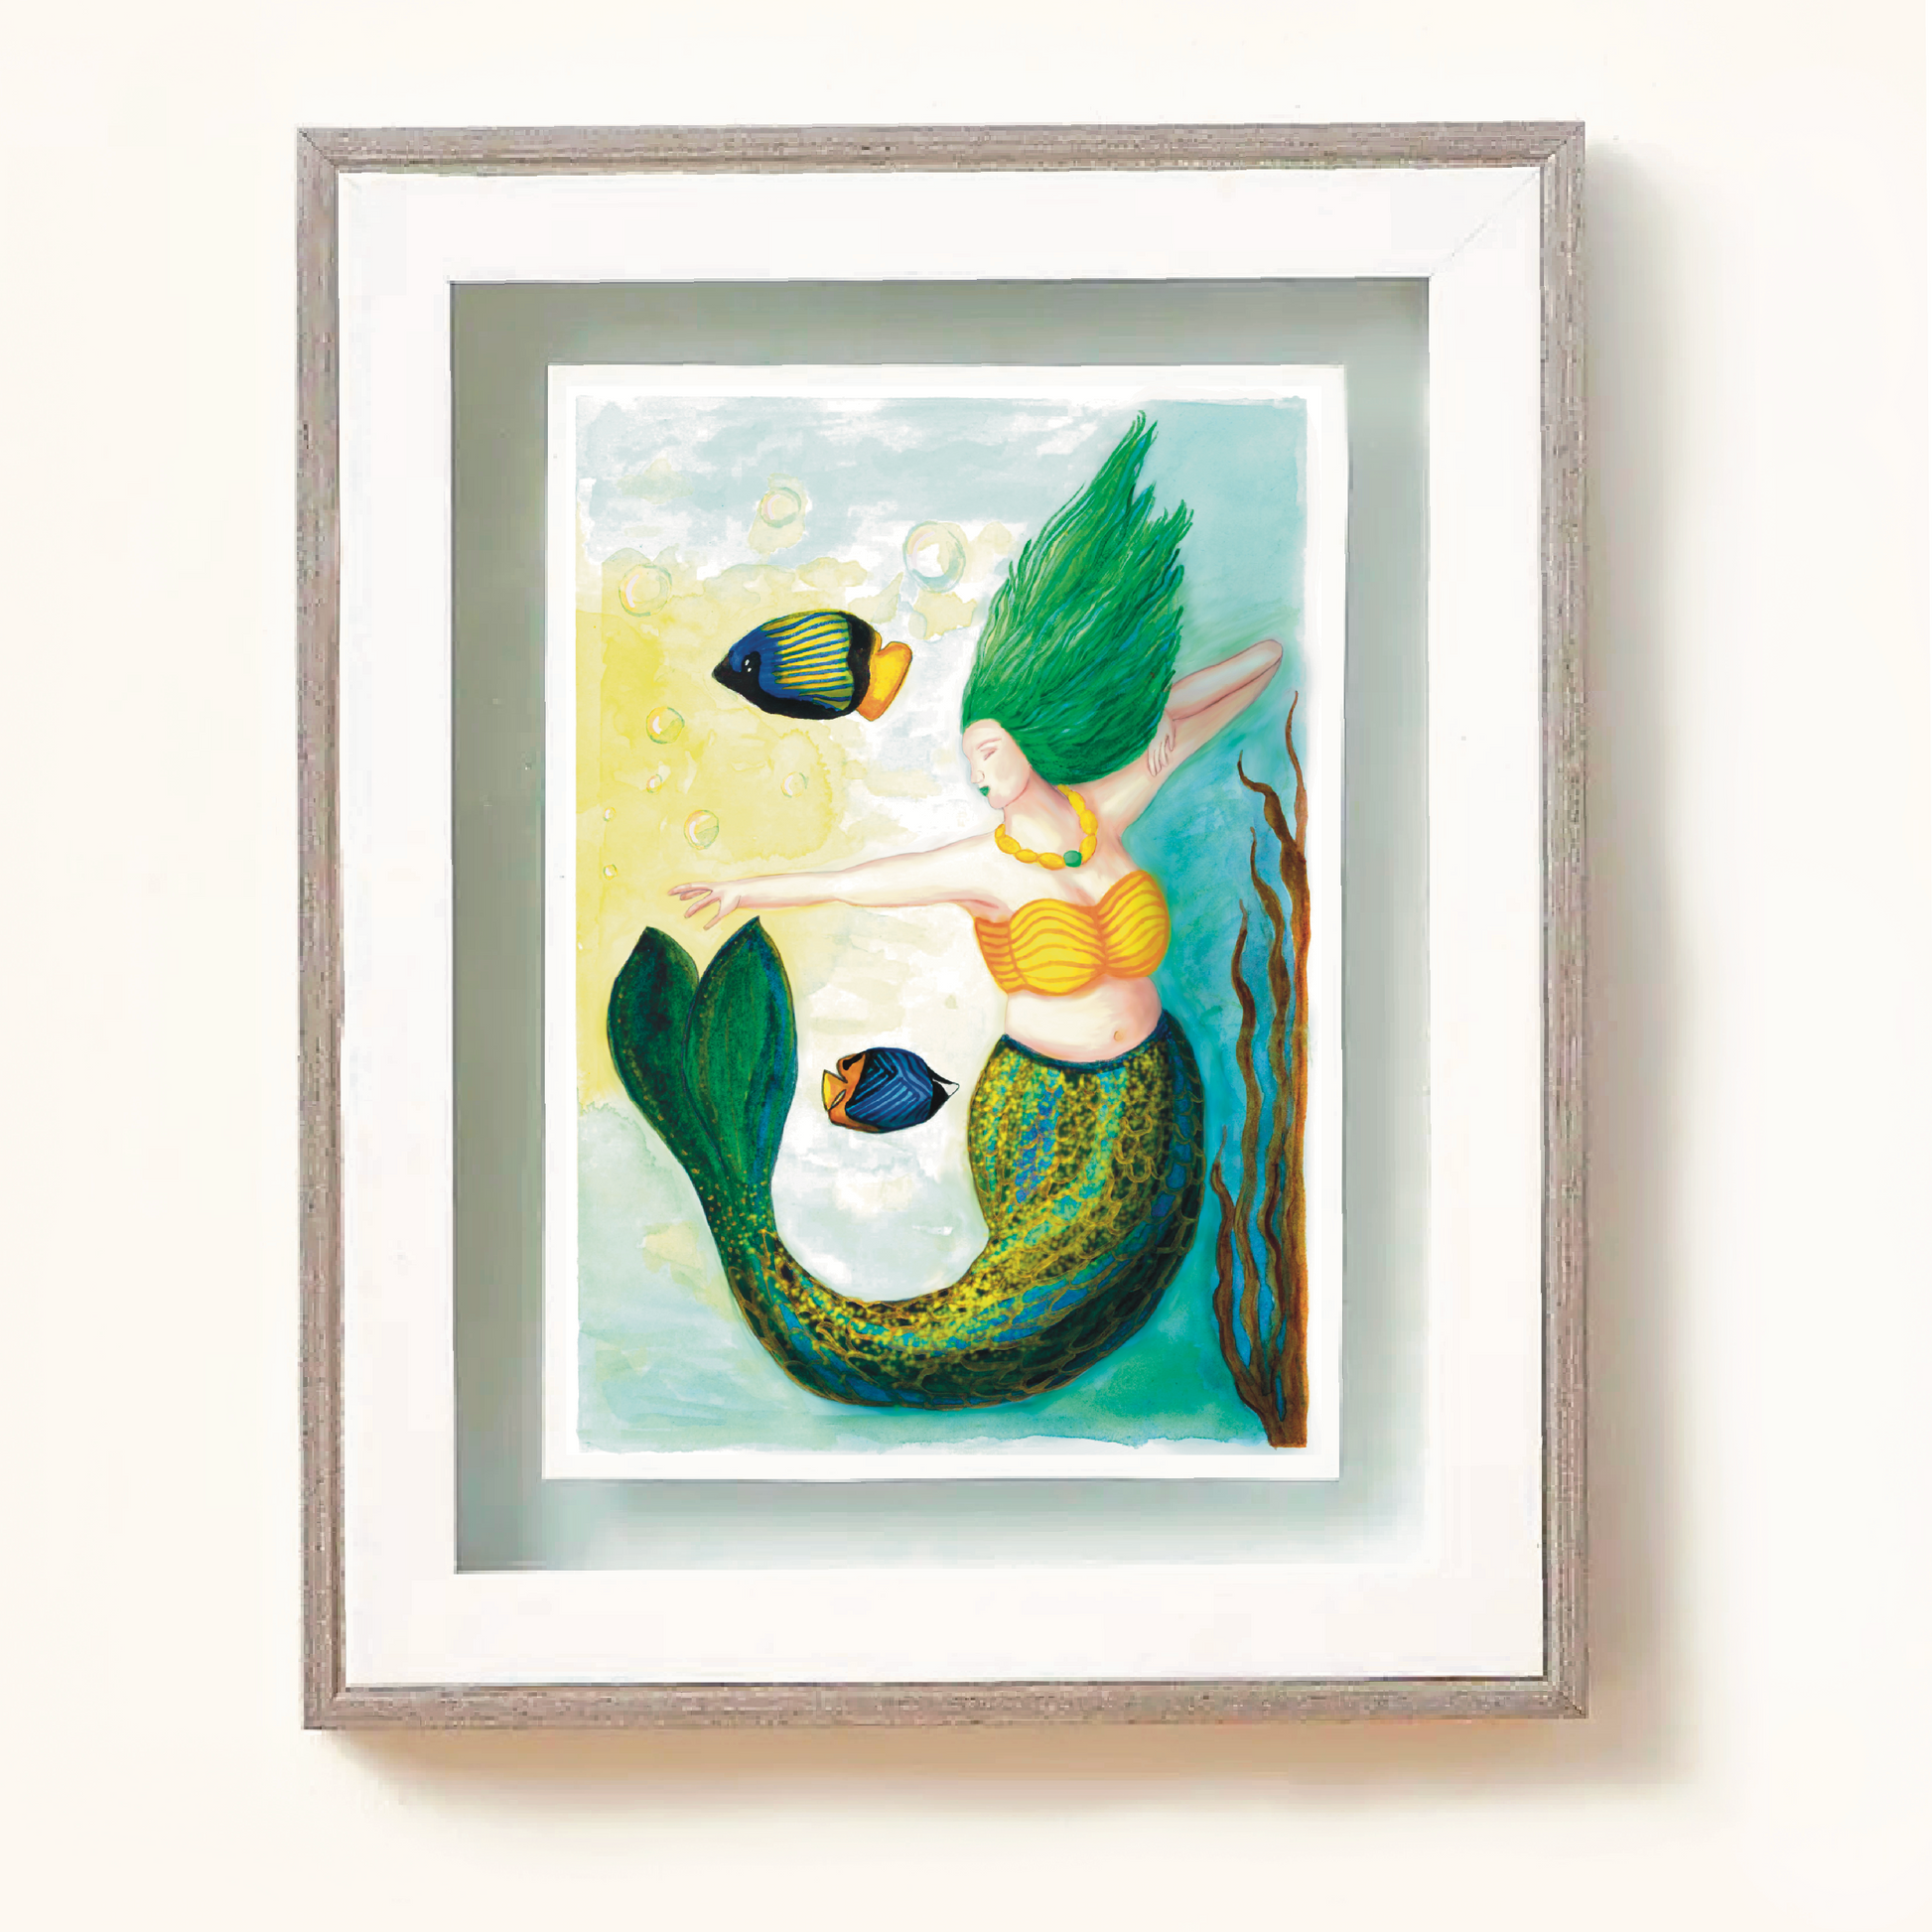 Framed art print of Stripe mermaid. Stripe has a blue green and gold striped tail, green flowing long hair and is pointing towards a glowing yellow light, and two fish swim nearby.